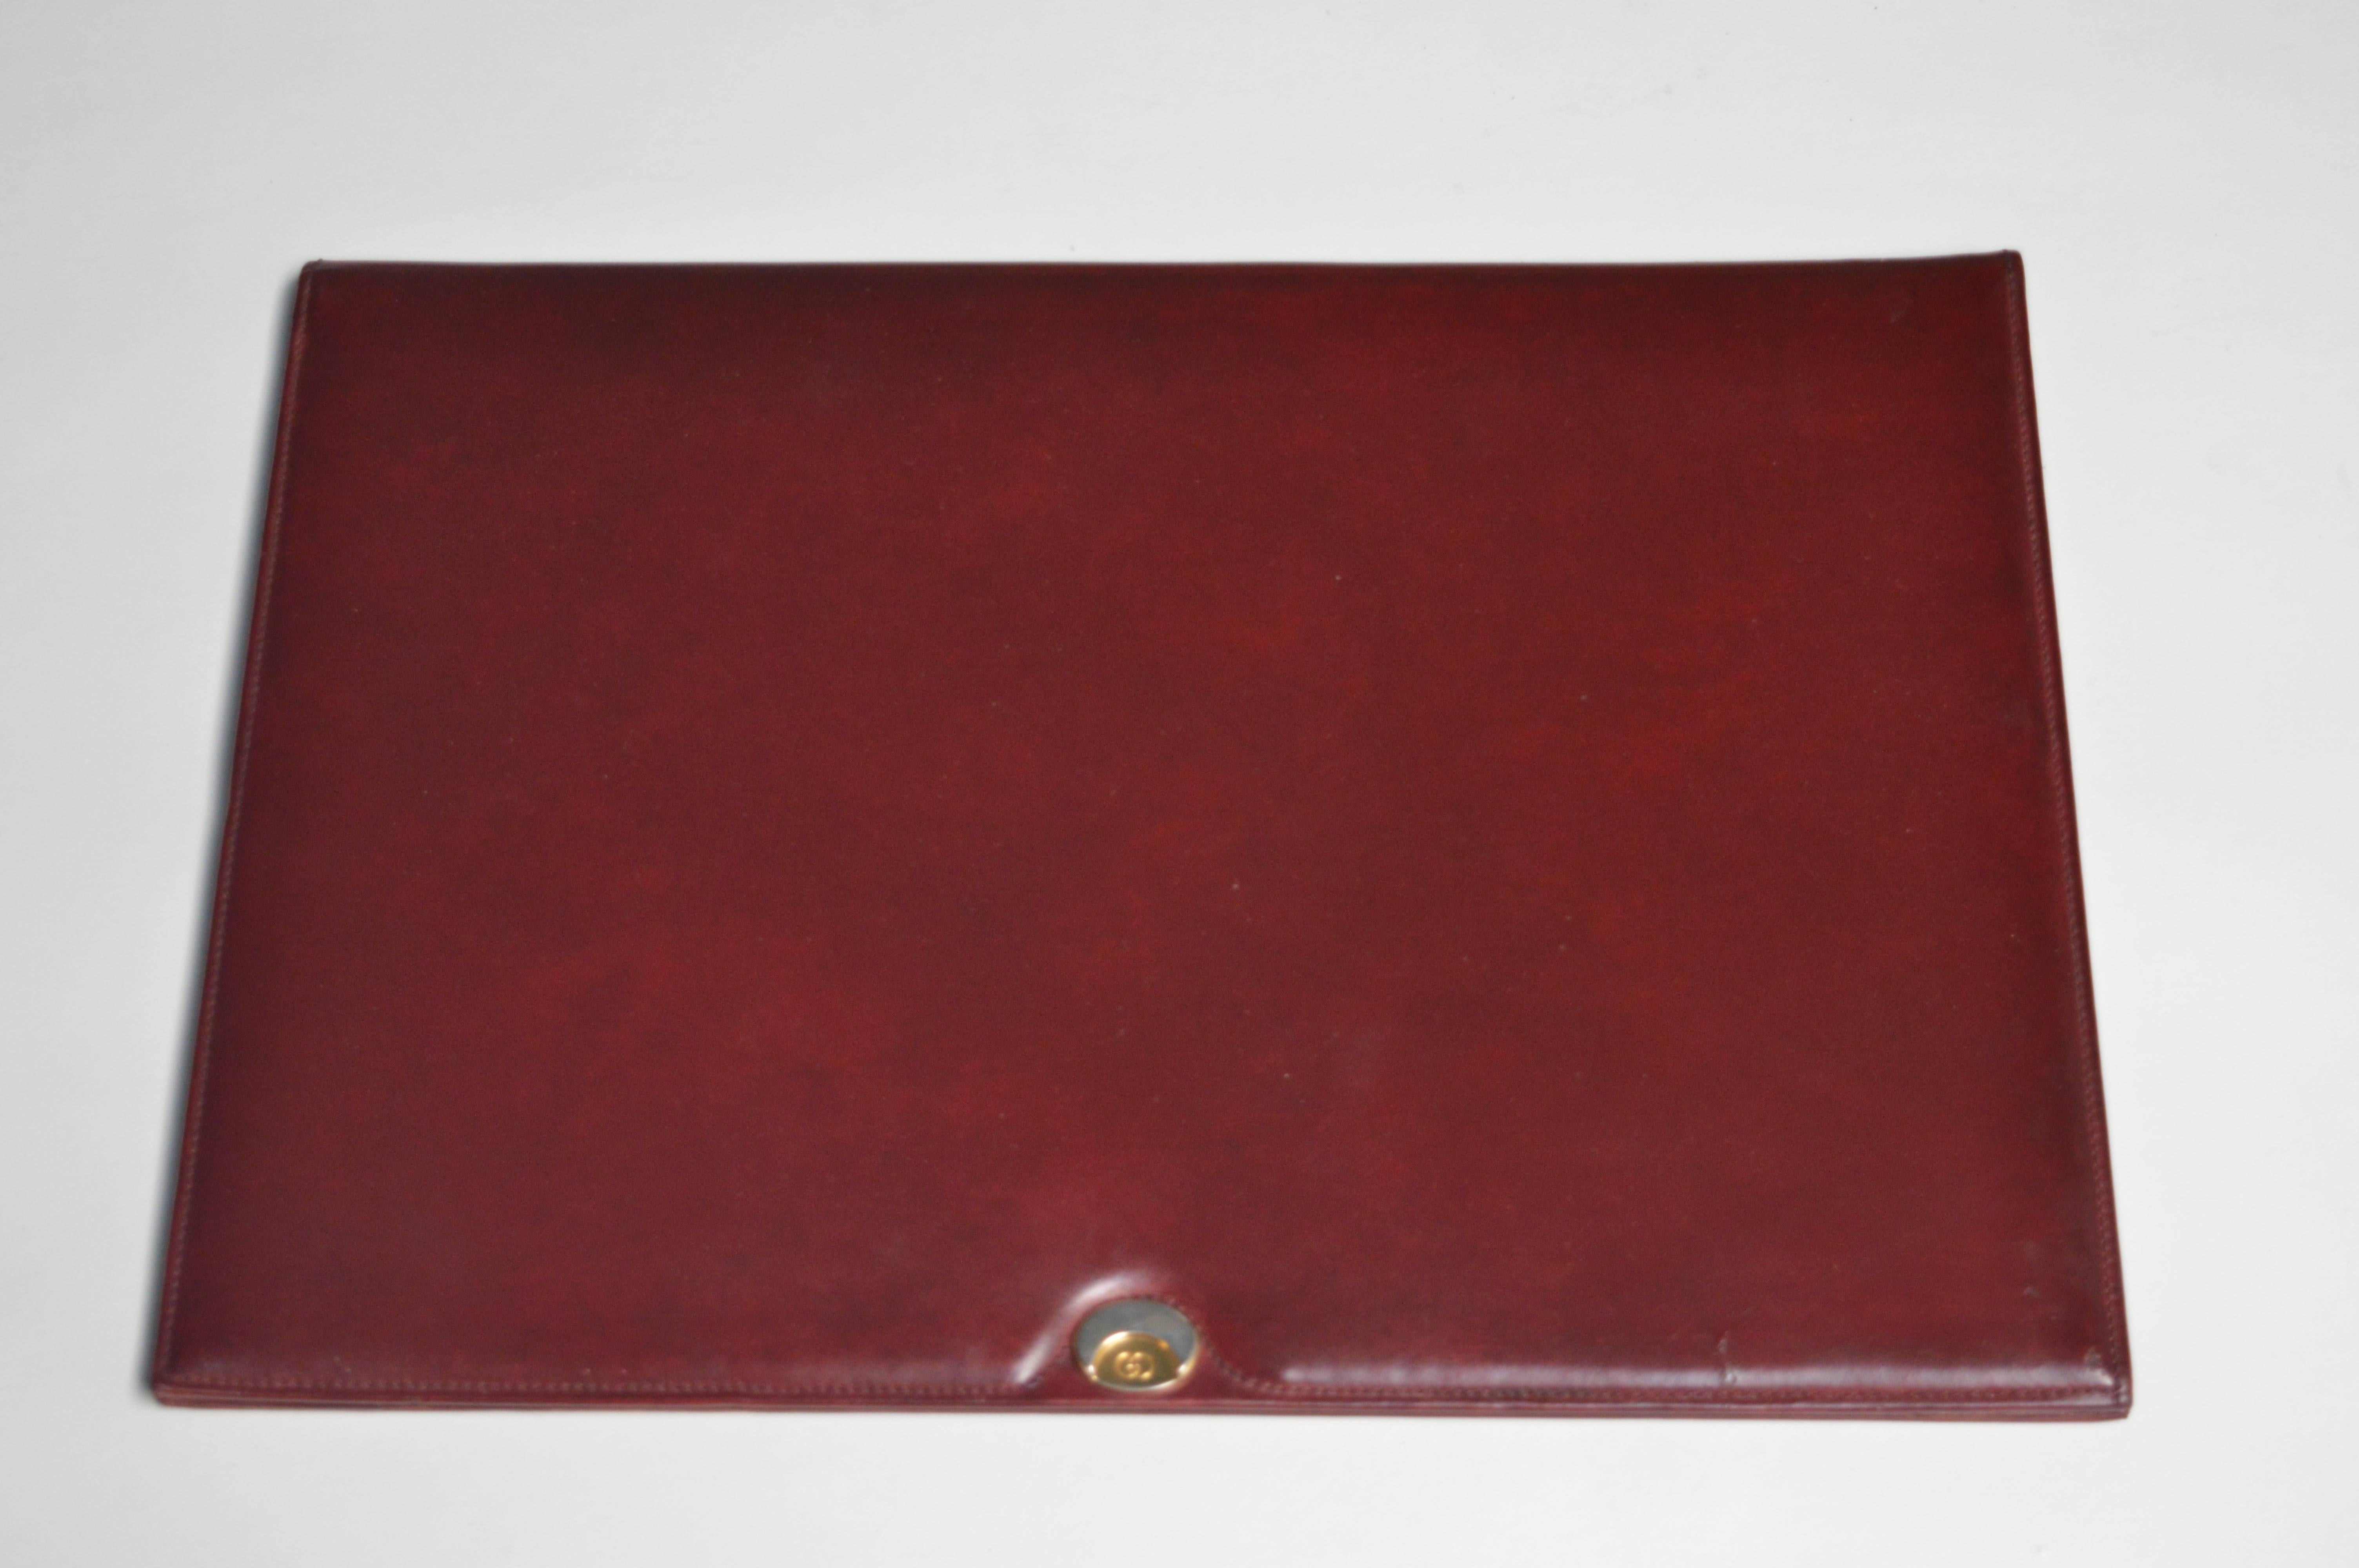 Handsome red leather Gucci desk calendar and writing pad. Original paper inside. Brass and chrome Gucci badge on front and Gucci logo stamped underneath. Excellent vintage condition.